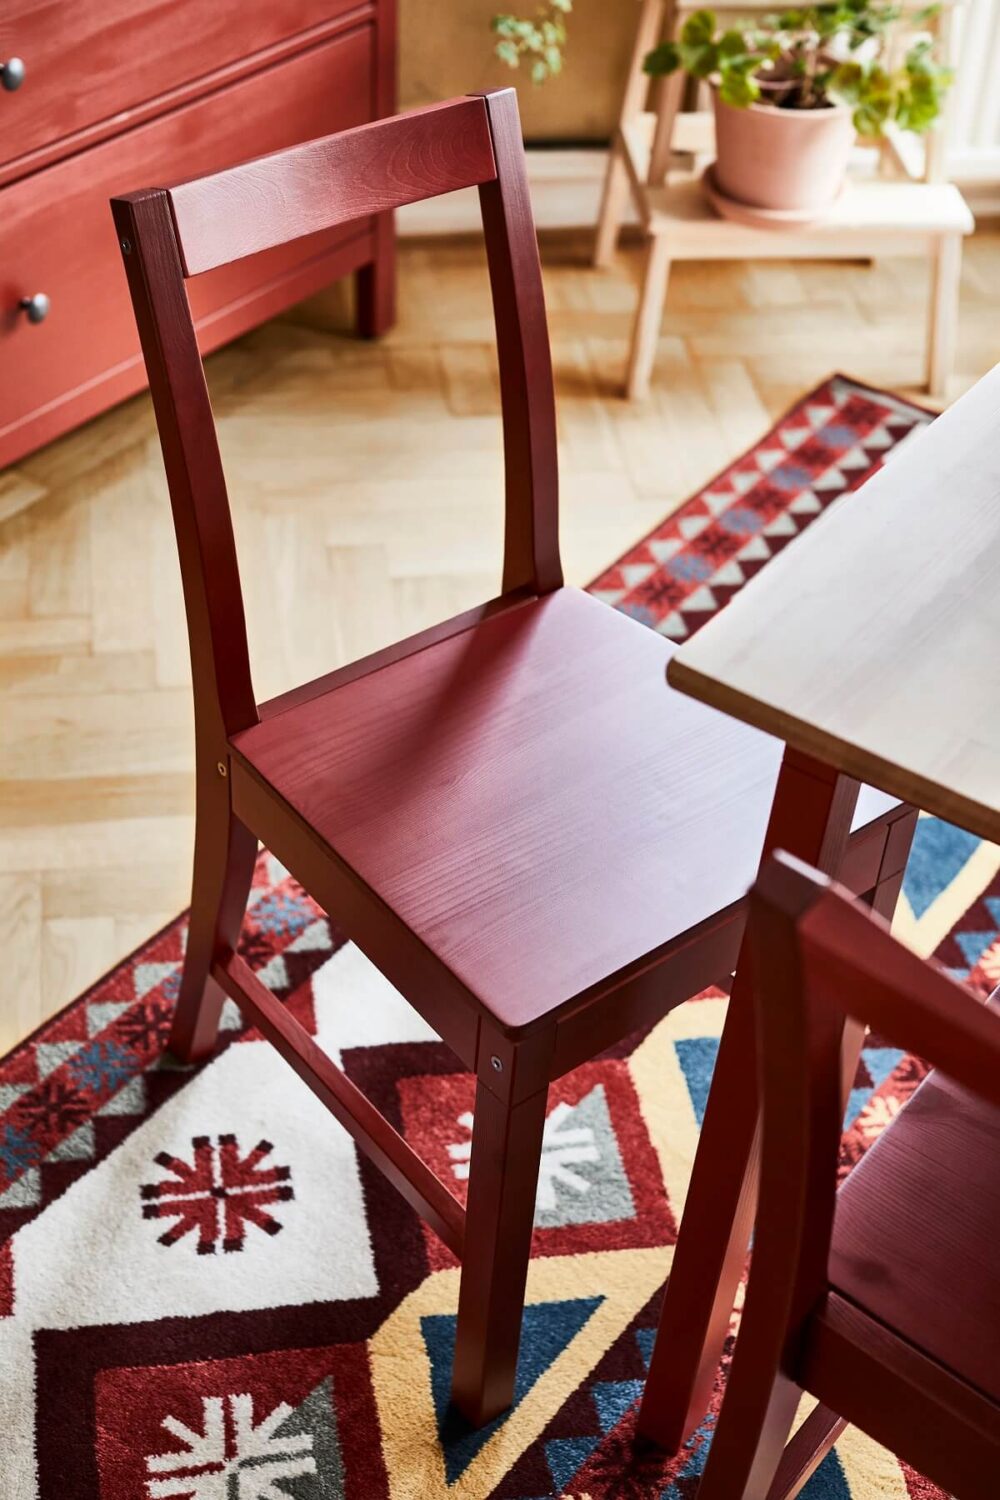 PINNTORP chair CYKELVAG rug nordroom IKEA Winter Collection 2022: A Warm & Inviting Home